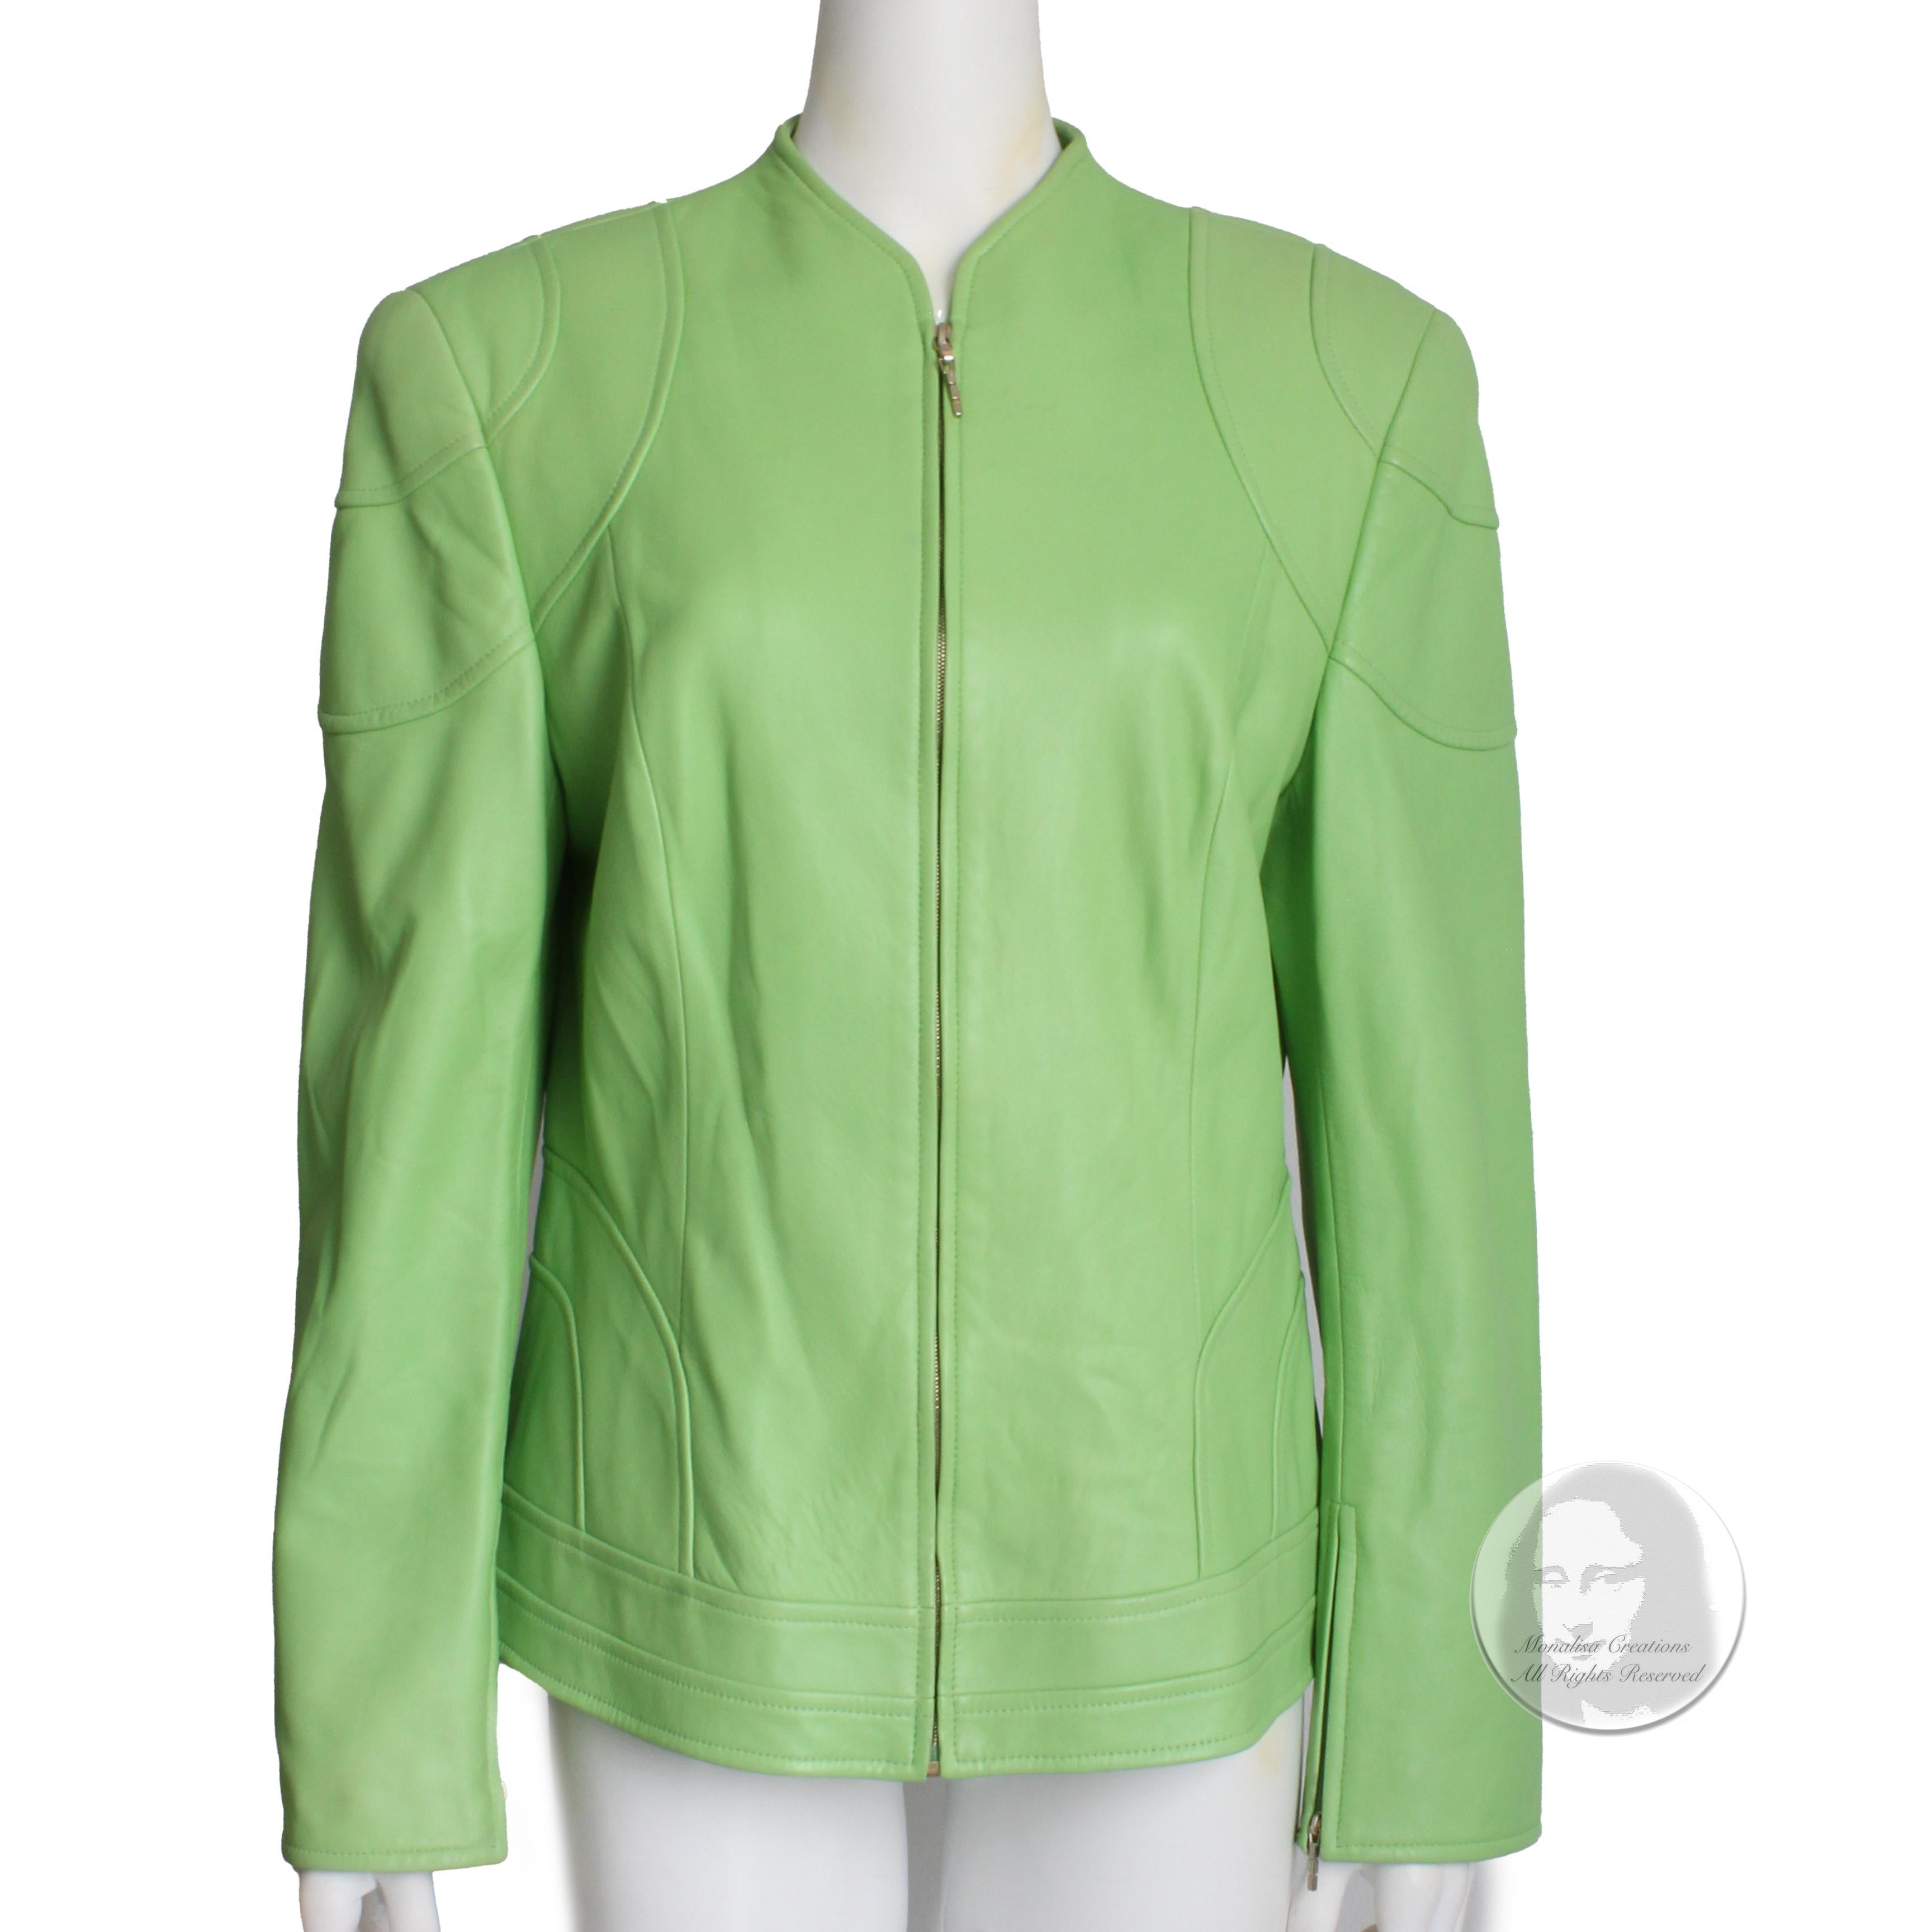 Authentic, preowned leather jacket with zipper front, likely made in the late 90s. Made from vibrant lime green lambskin leather, this jacket is butter-soft and gorgeous! Zipper fastener with smaller zippers at each sleeve bottom.  

Perfect for